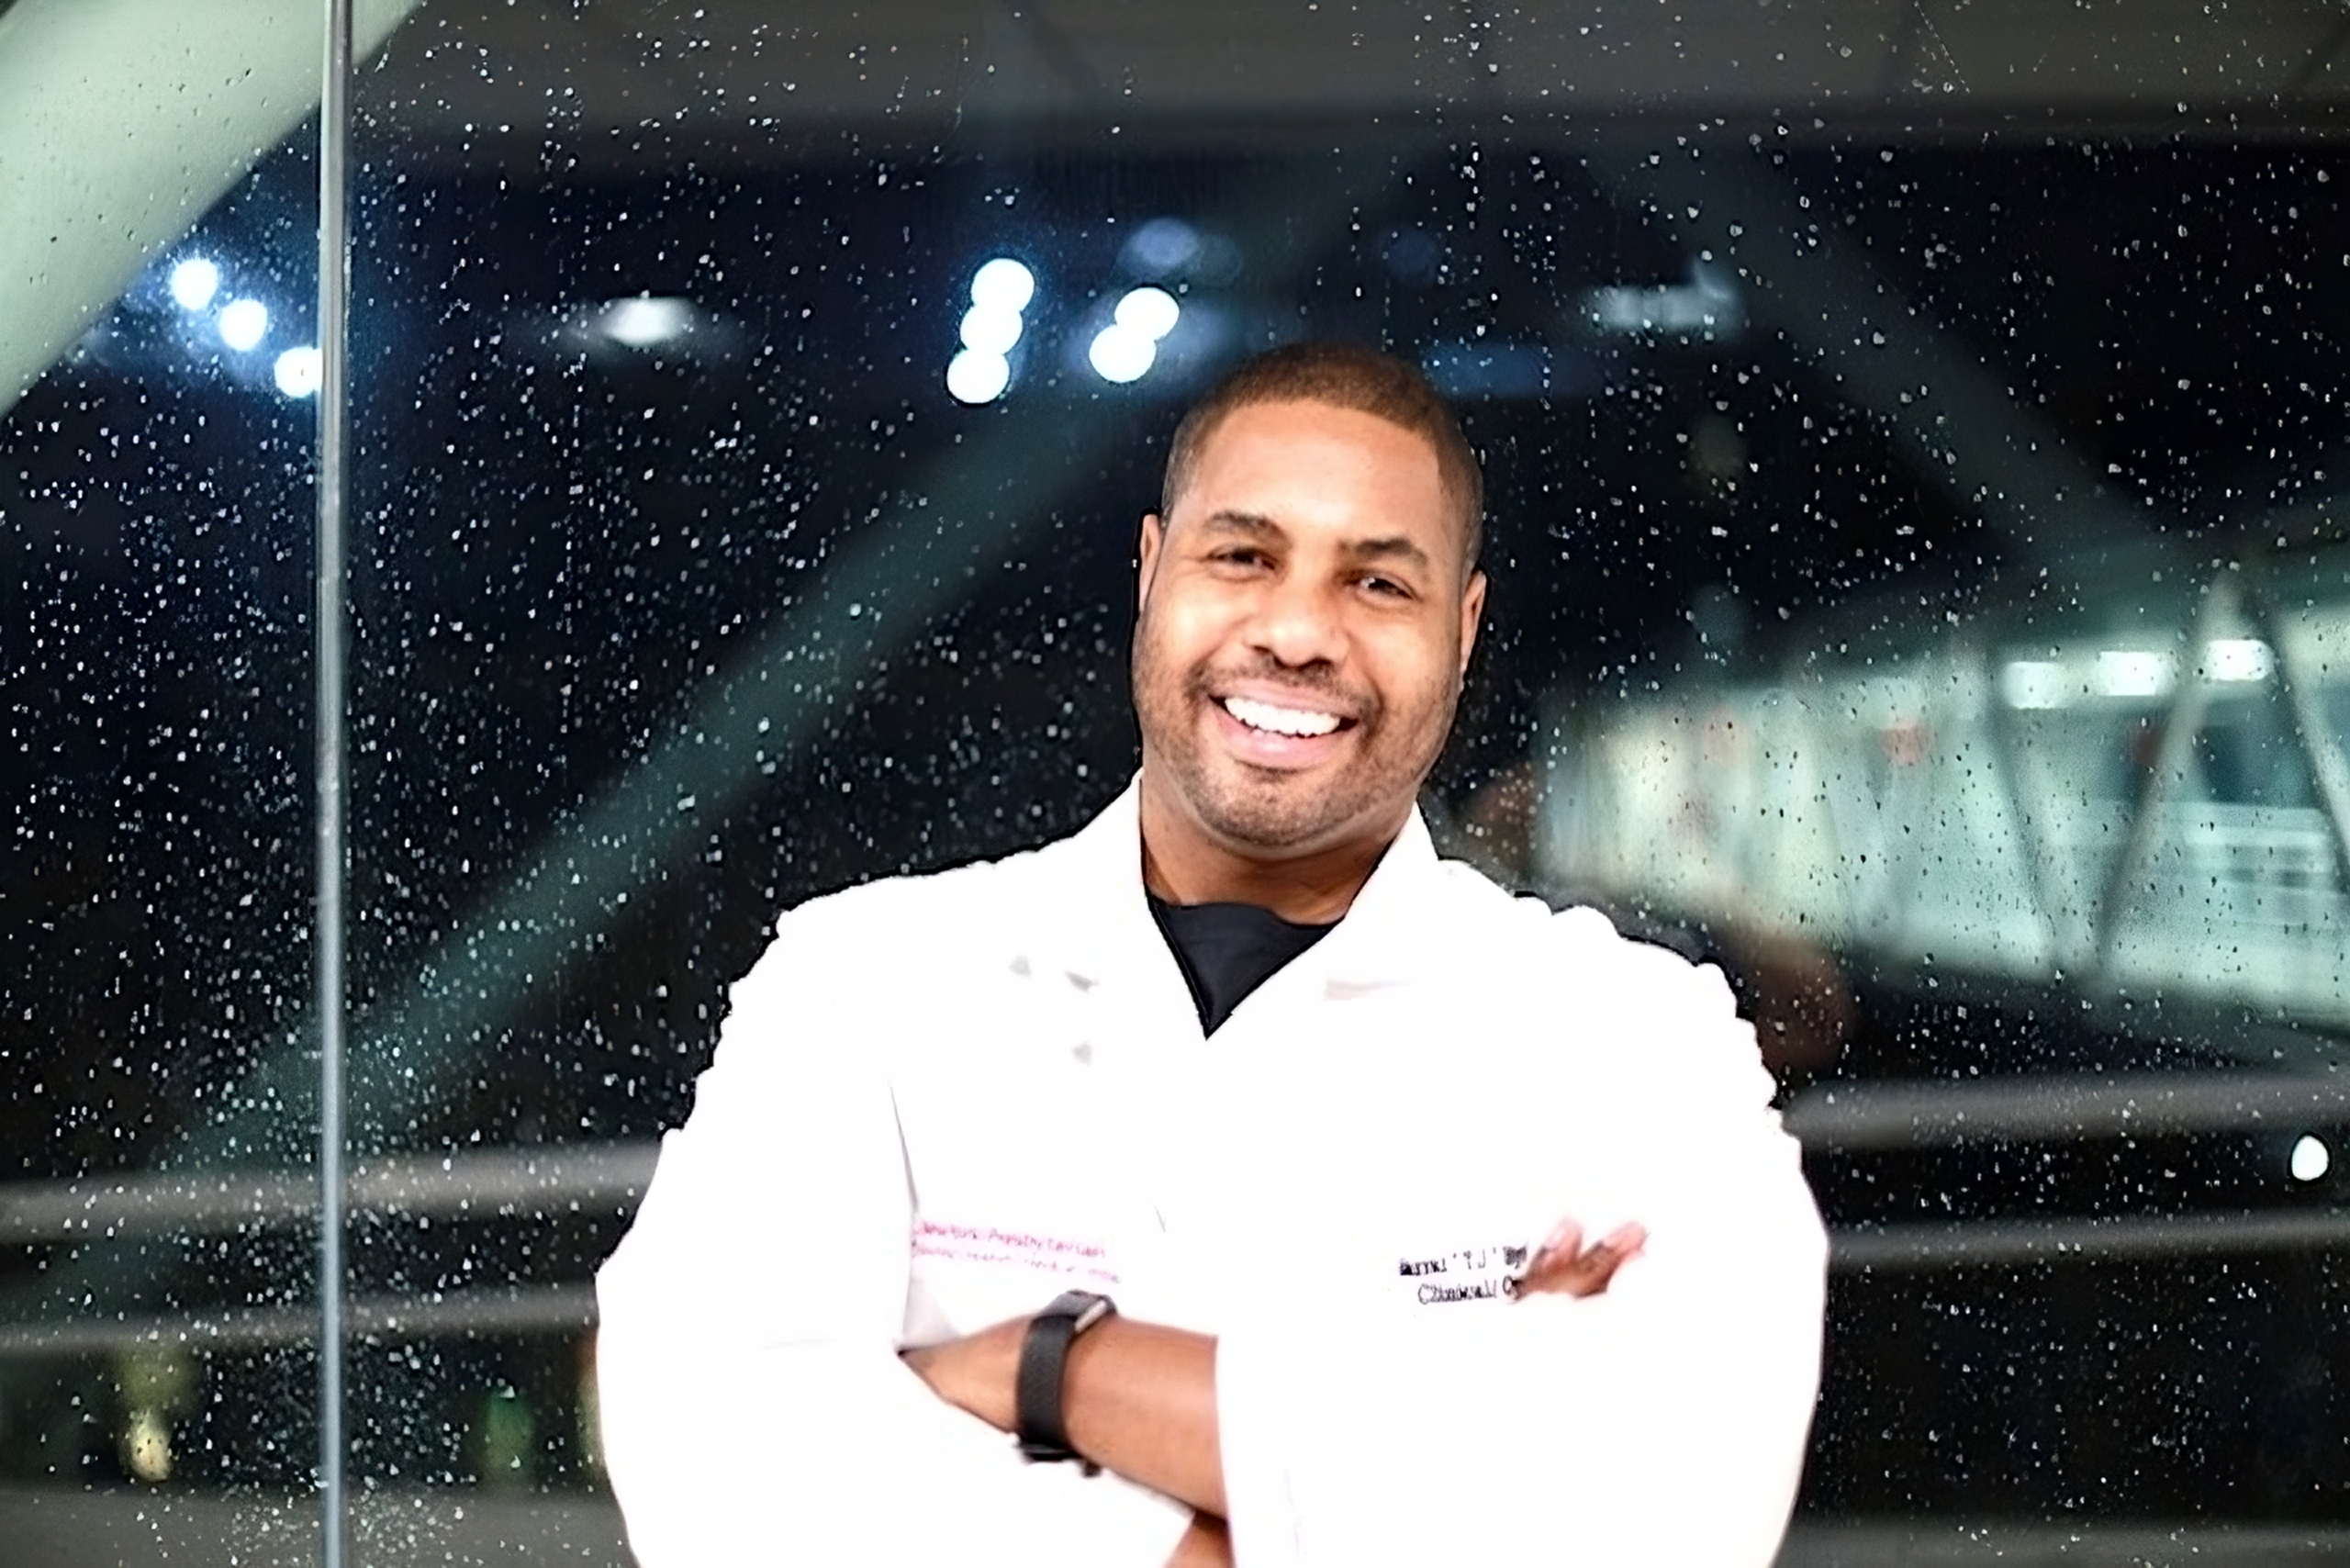 An image of pharmacist Charrai Byrd standing with his arms crossed in front of a rainy window at night. He is a Black man and is wearing a white lab coat.